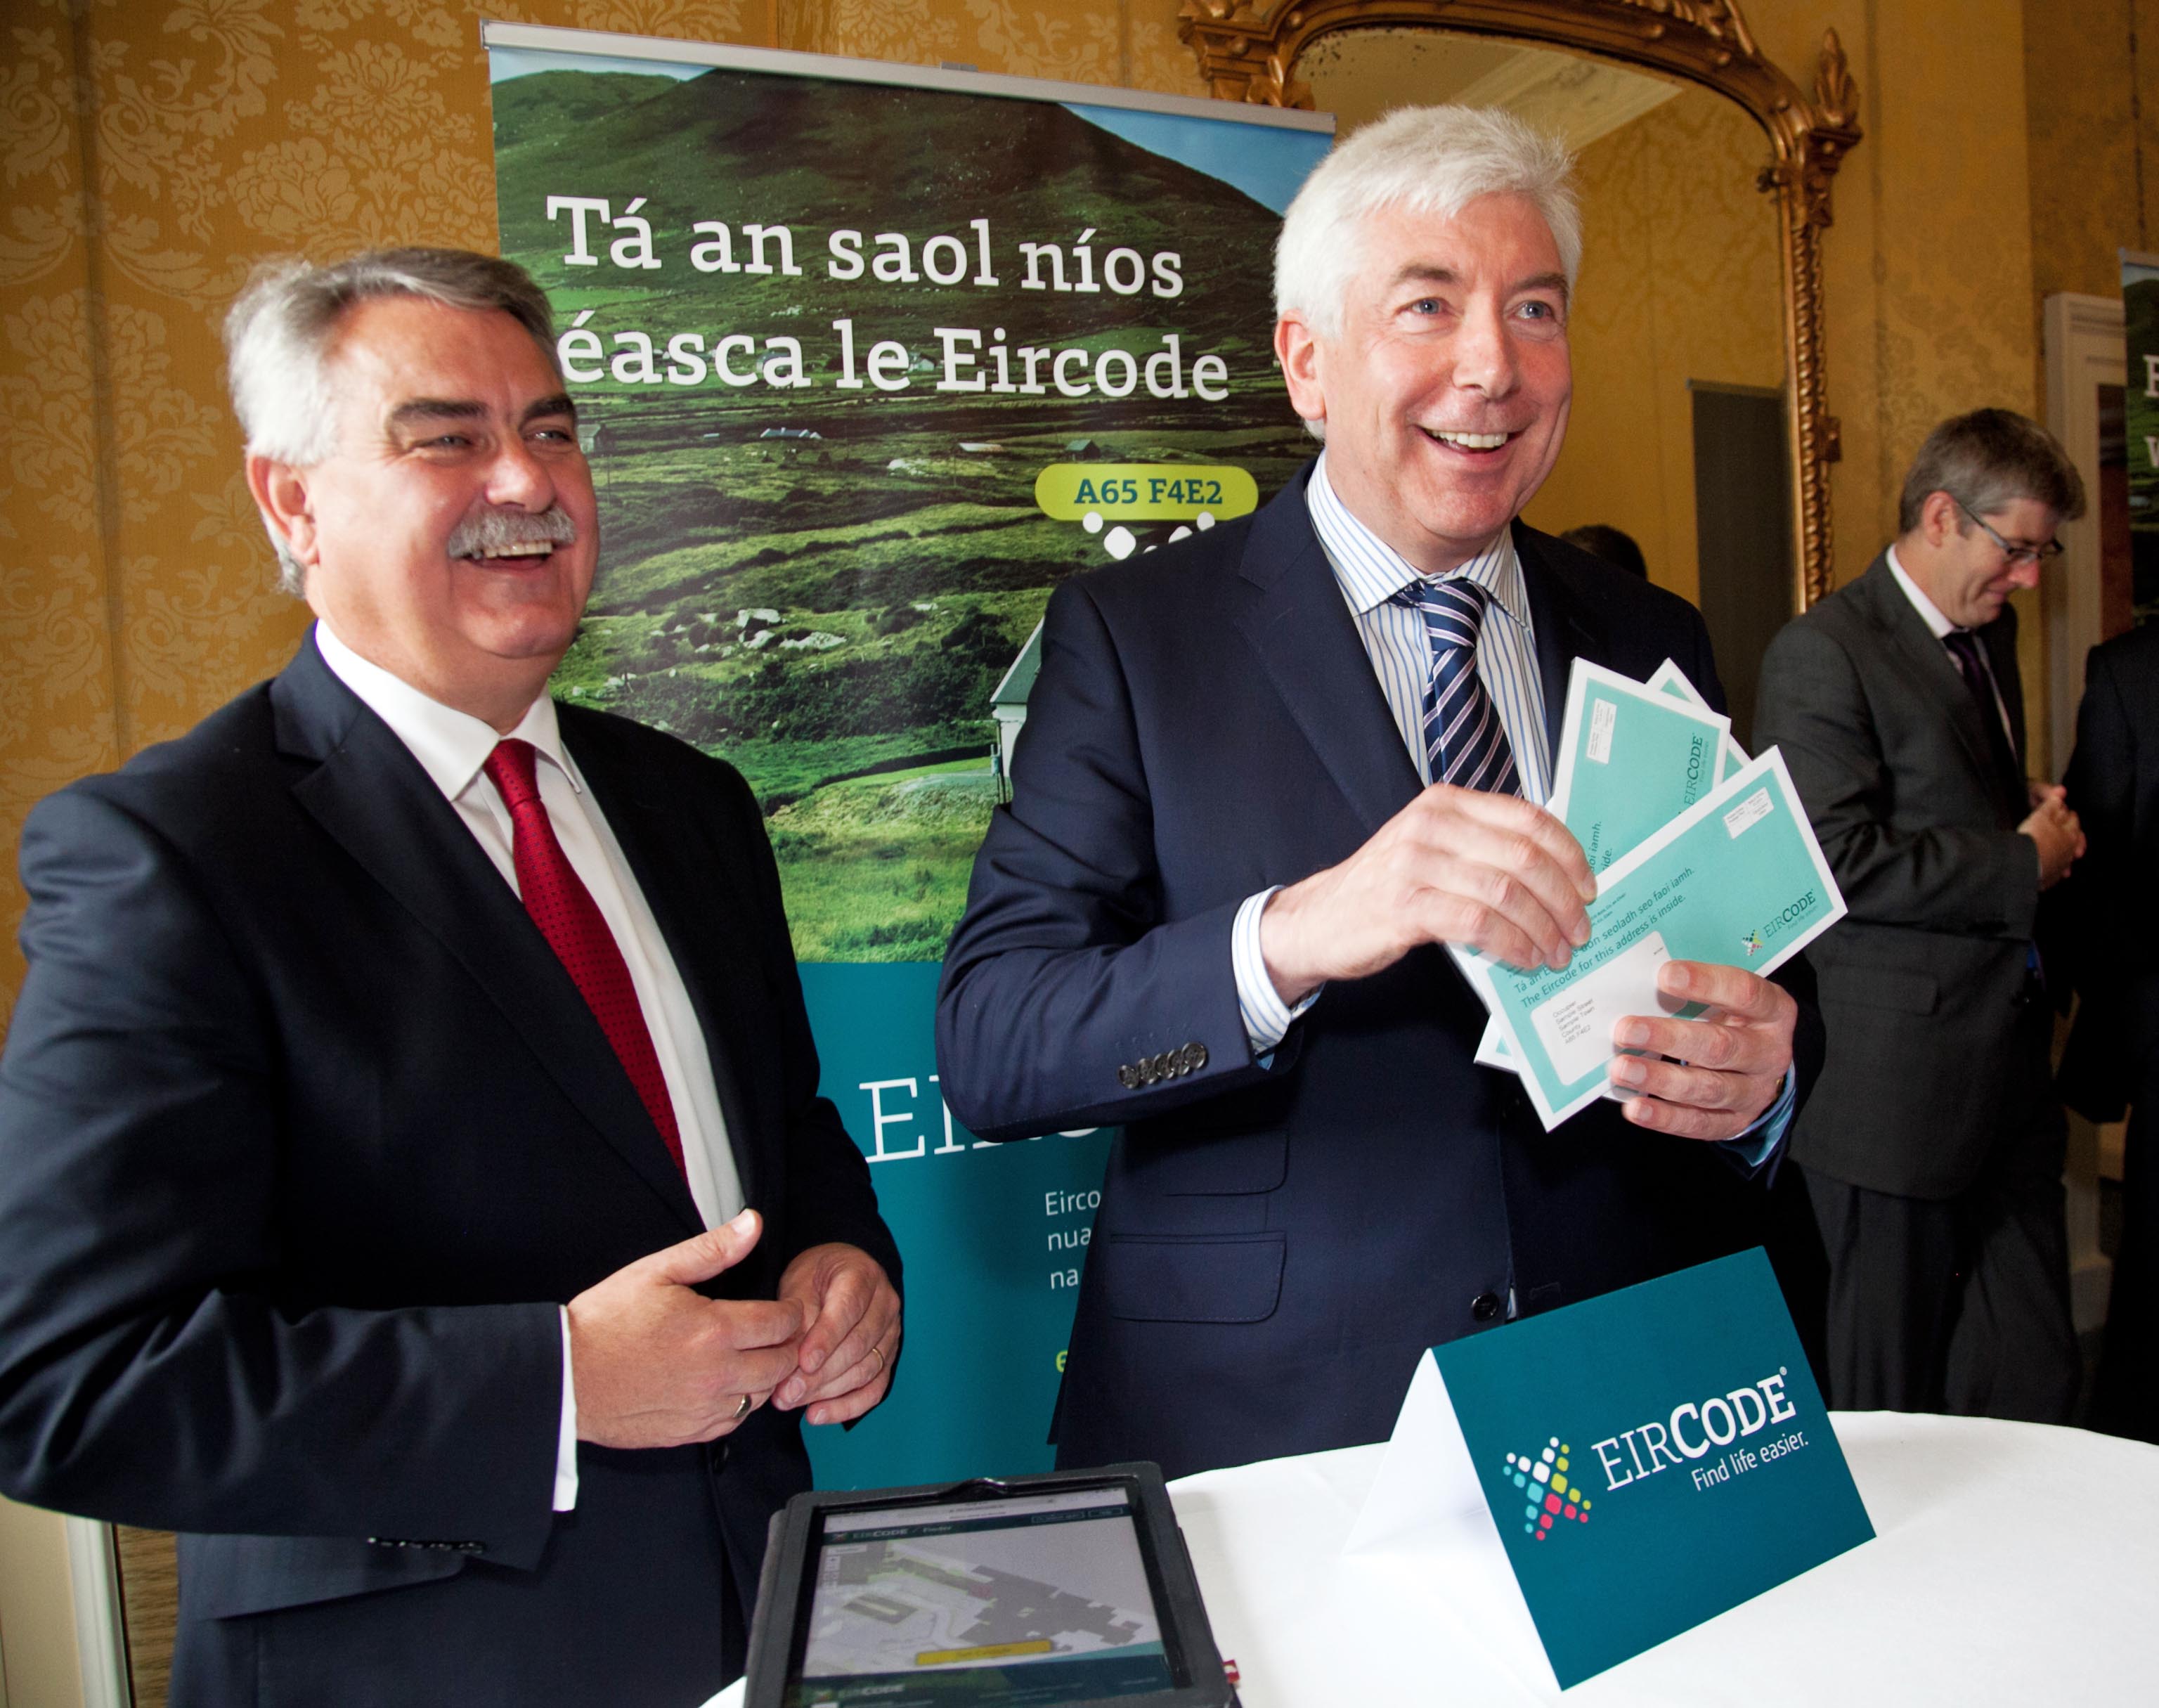 No fee for repro - copyright Paul Sherwood Photography © 2015 Eircodes are on the way to all addresses in Ireland A first for Ireland, Eircode to make life easier for Irish people, says Minister for Communications Alex White TD Today marks the official launch of Eircode, IrelandÕs new postcode system. Over the next two weeks, every residential and business address in Ireland will receive a letter in the post informing them of the new Eircode for that address.  Members of the public are being encouraged to look out for the letter in the coming weeks and, when it arrives, memorise the Eircode and keep it somewhere handy. Minister for Communications Alex White TD launched Eircode at an event in Dublin today, where a unique new online tool, the Eircode Finder, was also unveiled.This handy online search tool allows members of the public to use their PCs, tablets or smart phones to look up an address to find its unique Eircode.  The Eircode Finder also contains a useful map that helps identify addresses quickly and easily. Media contact, Republic of Ireland - Rosemary Simmons, Prior Communications 01 6627 111 or 087 250 0496 rosemary.simmons@priorcommunications.ie or Fiona Thornton, Prior Communications 01 6627 111 or 086 892 8277  fiona.thornton@priorcommunications Pictured - Liam Duggan, director of Eircode, Minister for Communications Alex White TD